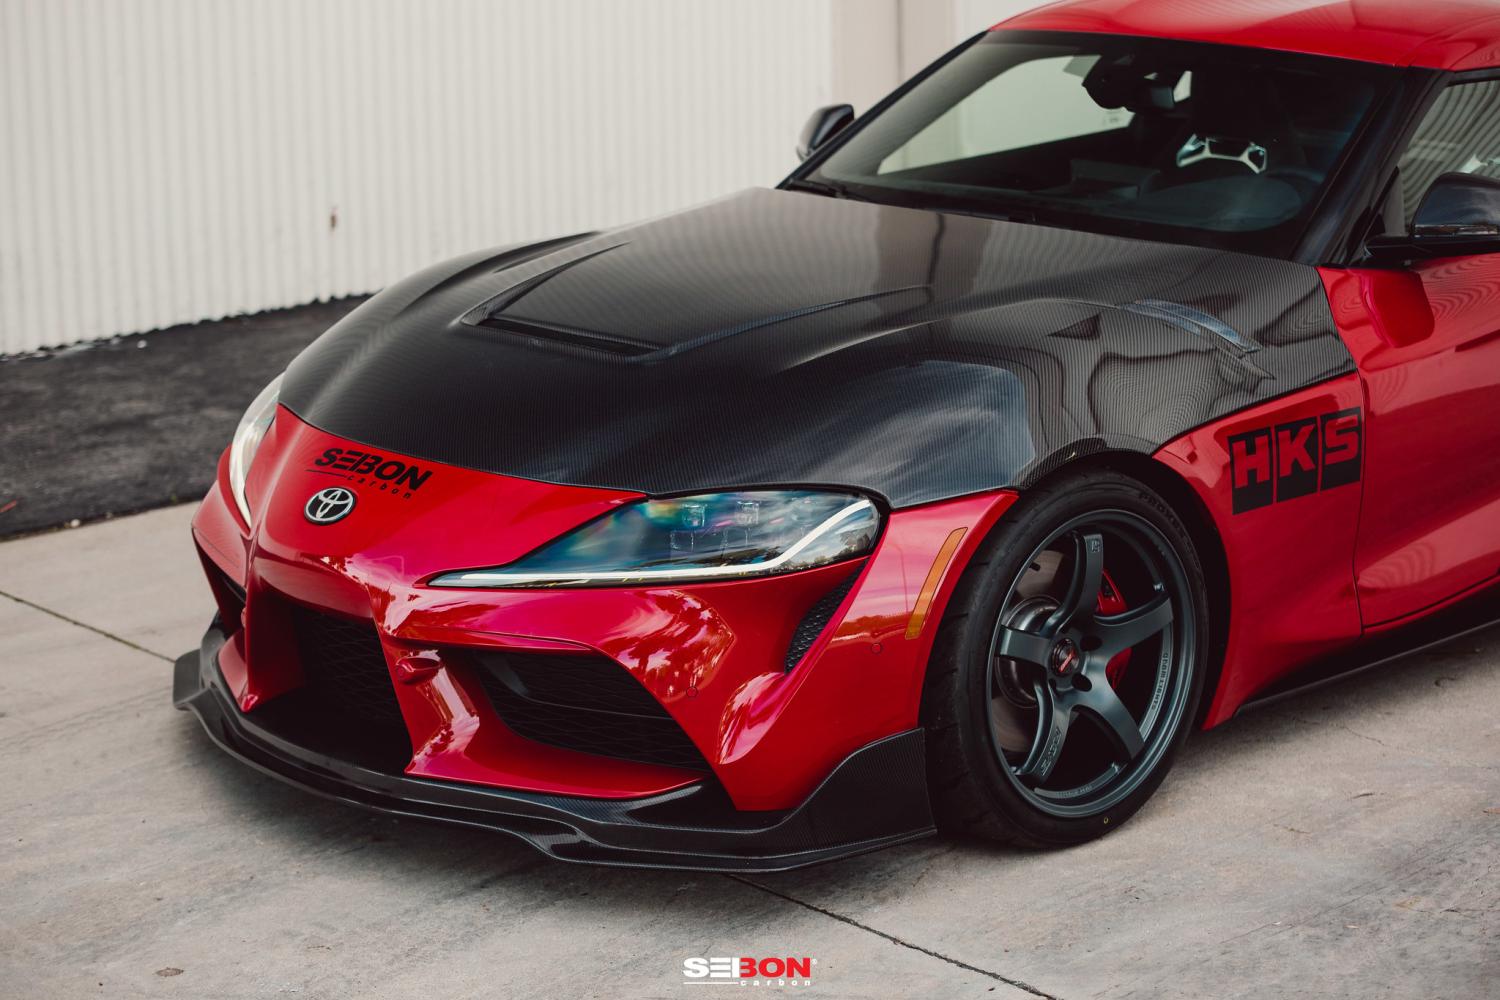 New Product: VS-Style Double-Sided Carbon Fiber Hood for the 2020 Toyota Supra